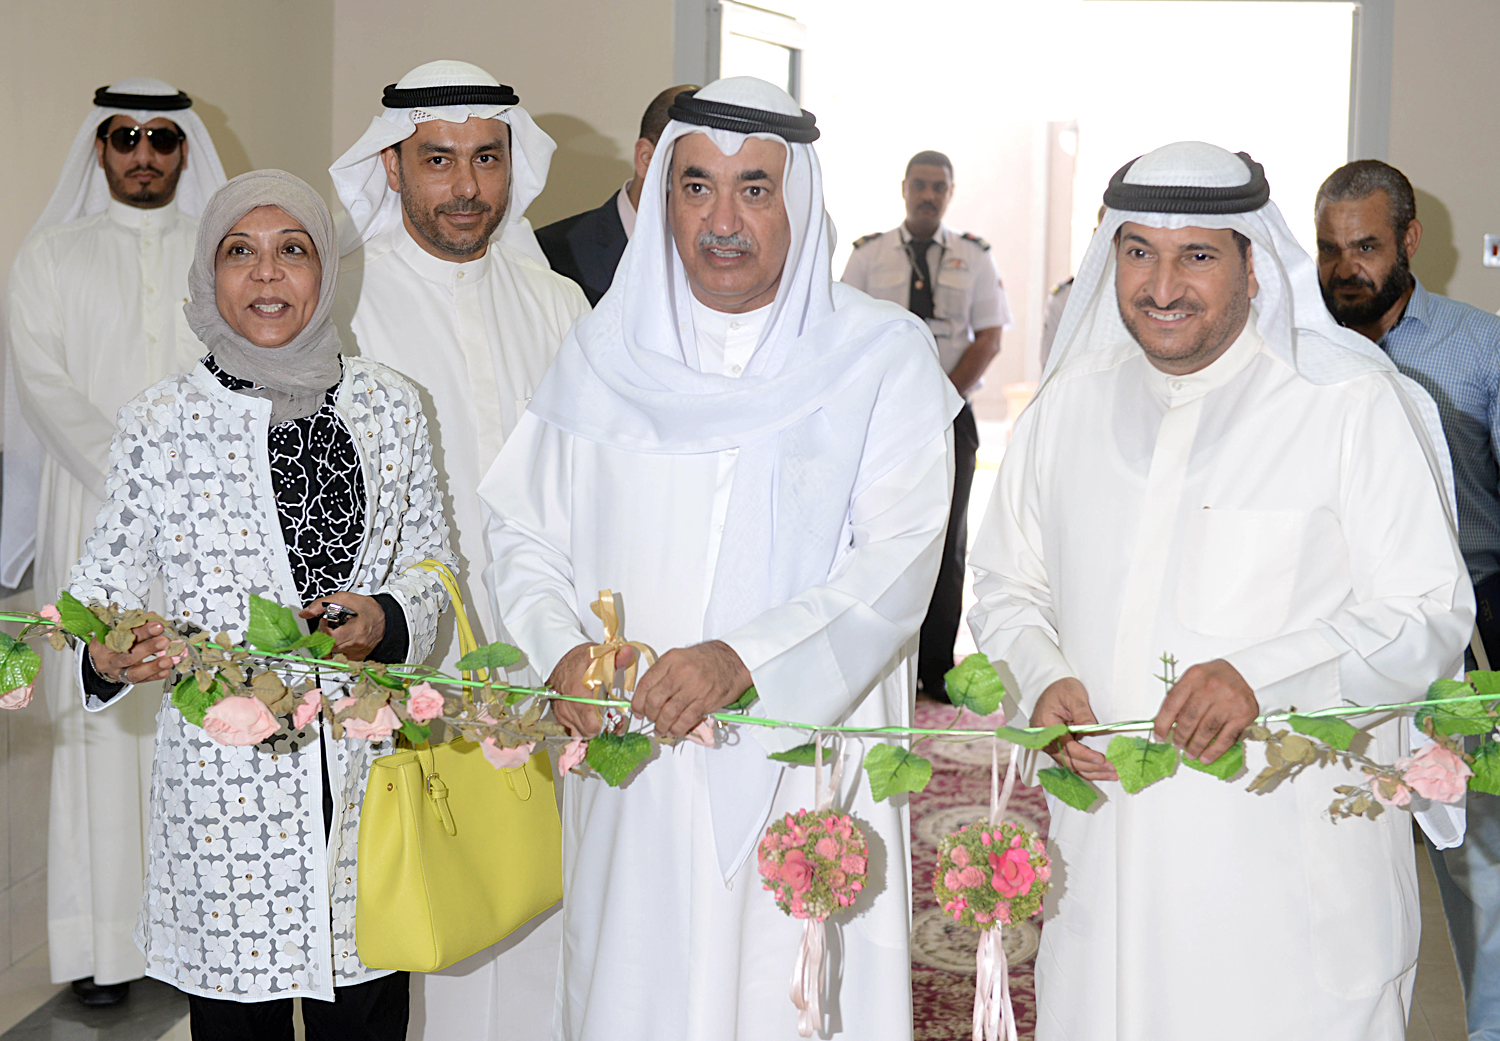 Minister of Education and Minister of Higher Education Dr. Abdulmohsen Al-Madaj during opening of two new schools in the Mubarak Al-Kabeer